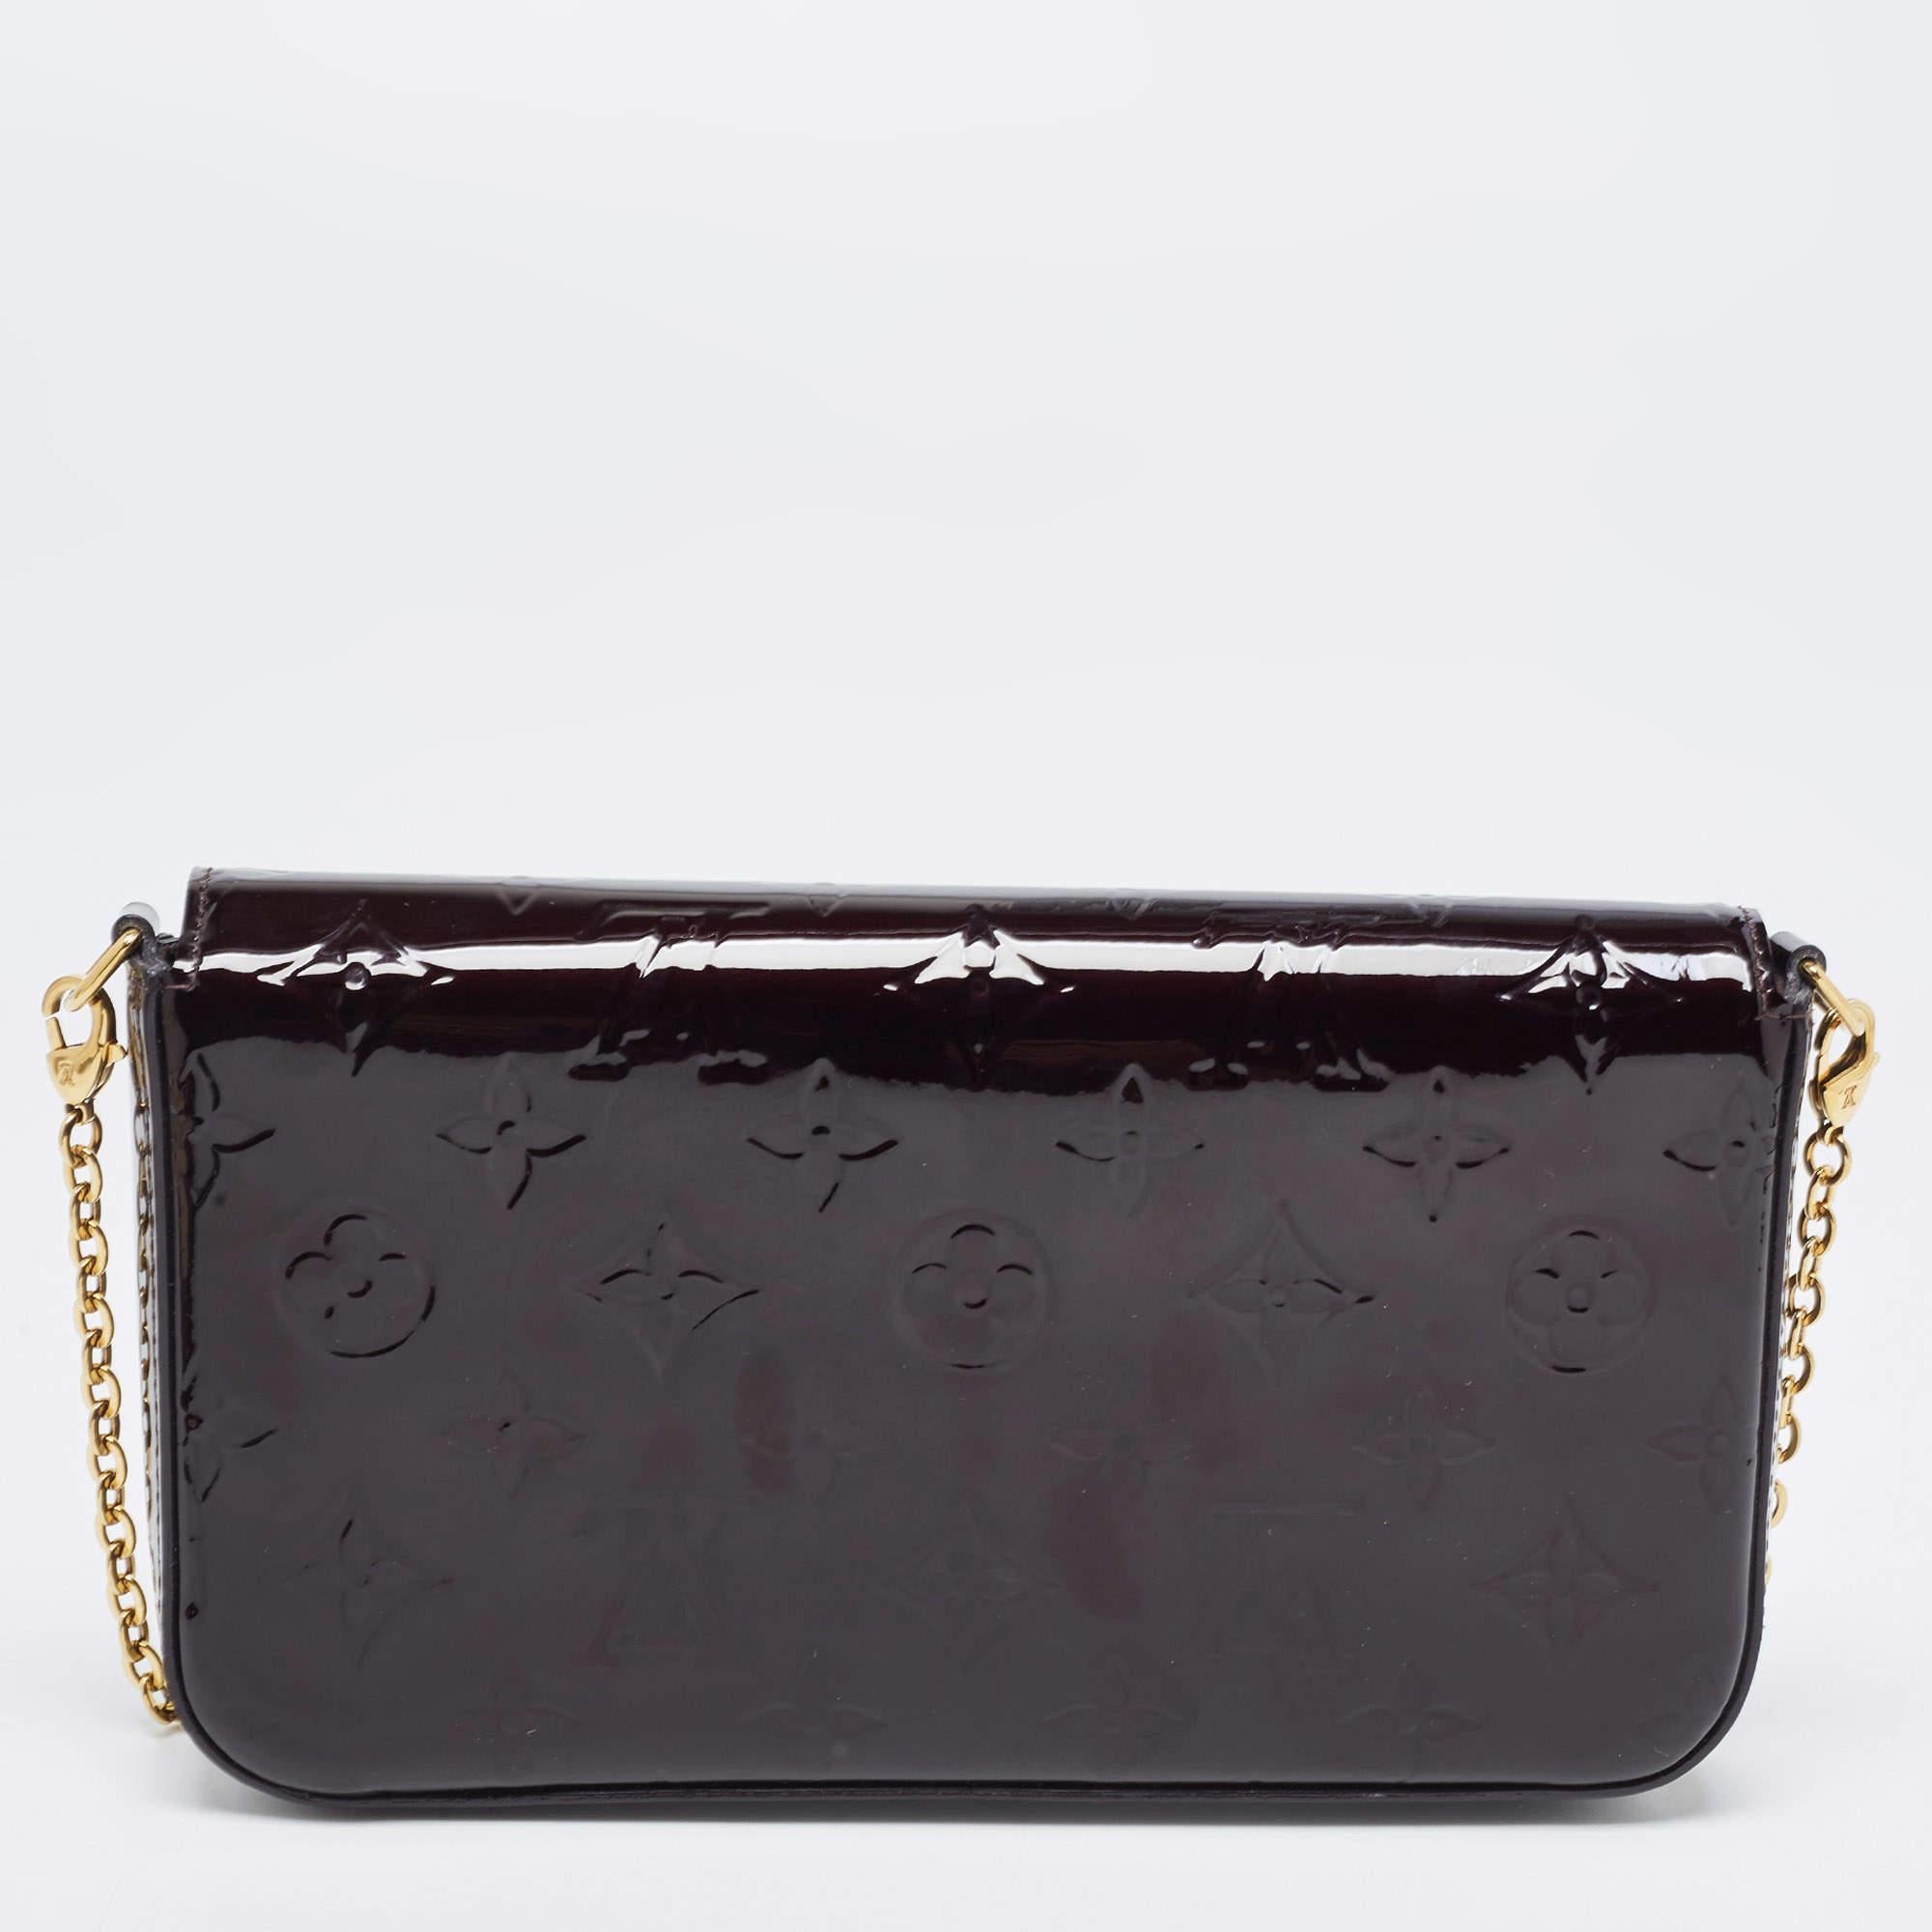 This Pochette Félicie has been designed to be a shoulder bag as well as a clutch. It is crafted from Amarante Monogram Vernis leather and has a canvas-lined interior, an envelope flap, and a gold-tone chain. The bag comes in a convenient size that